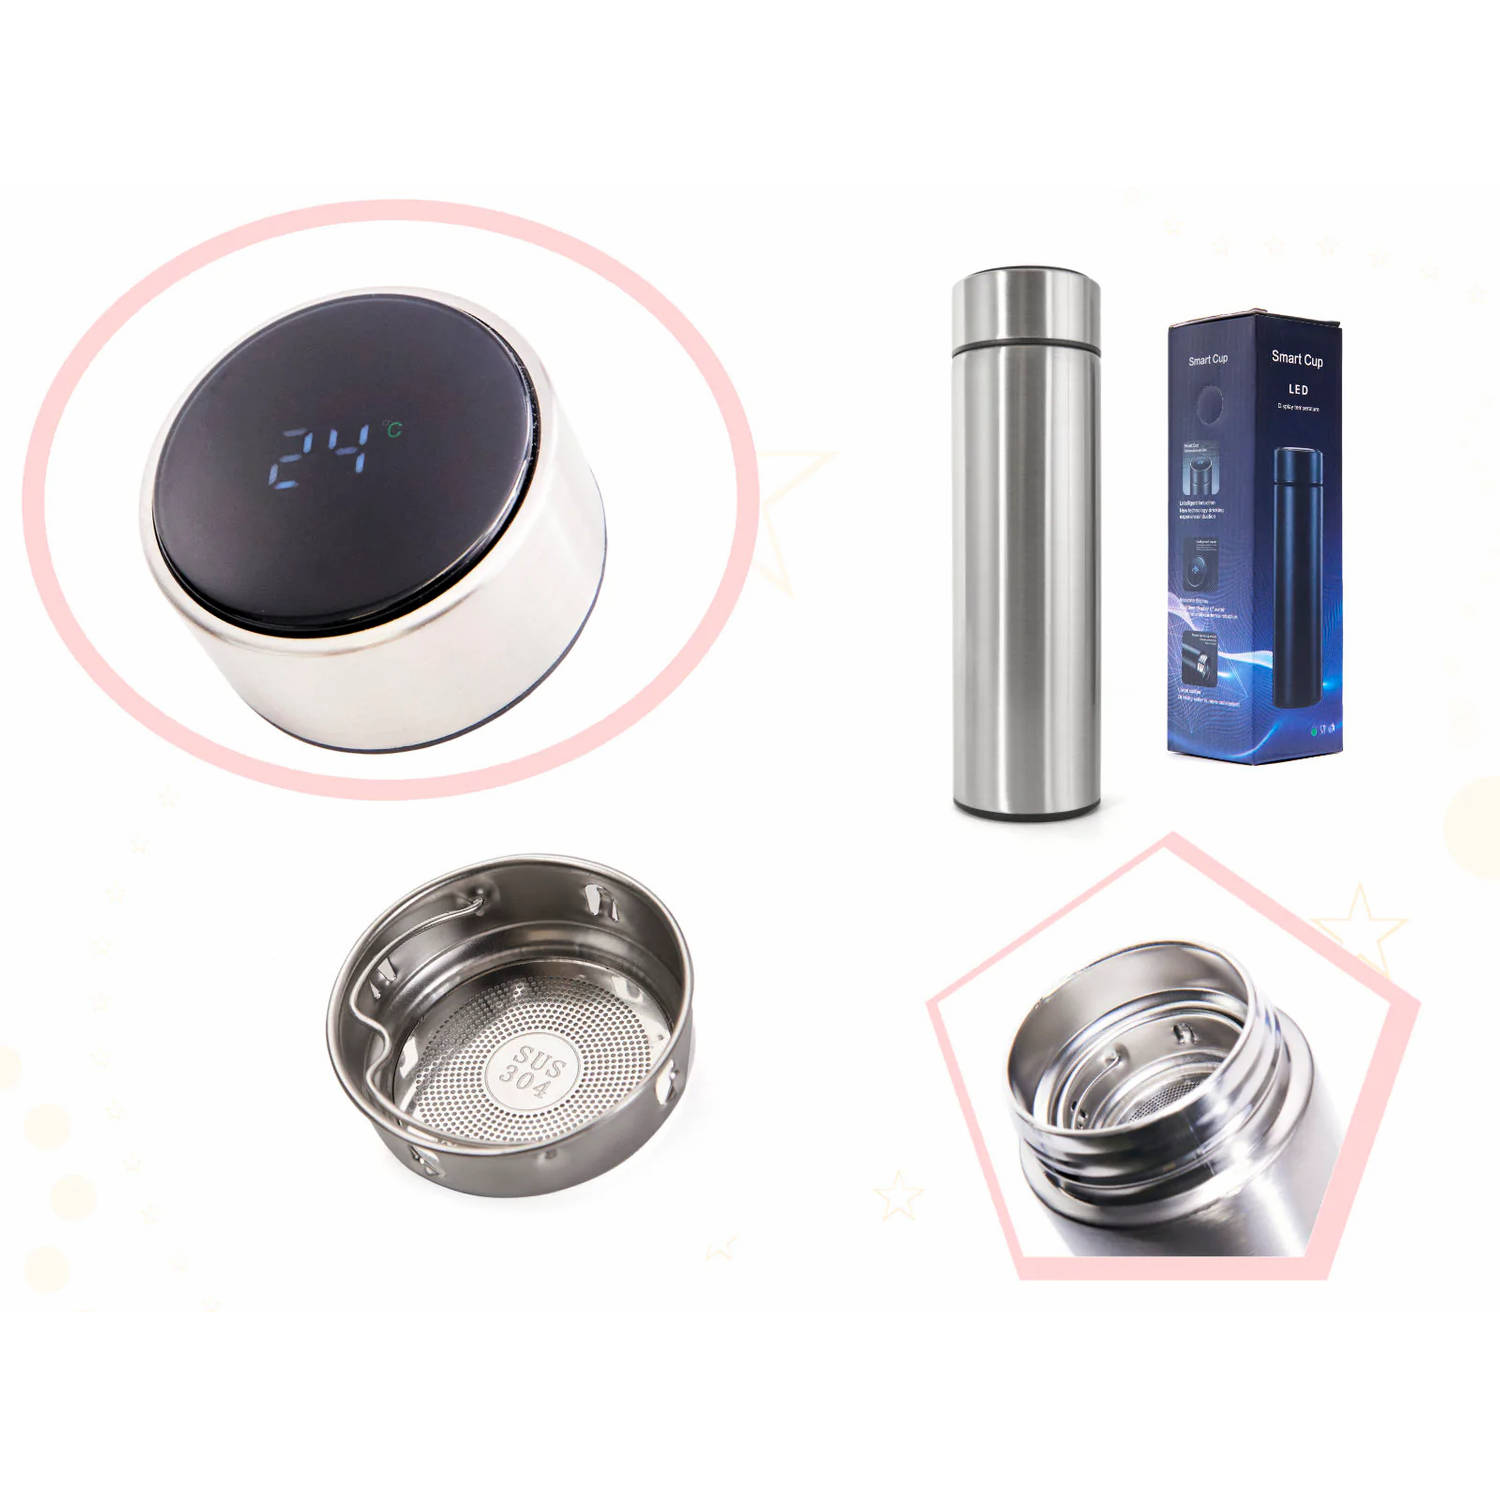 Thermos mok smart LED 500ml zilver thermosfles isoleerkan -